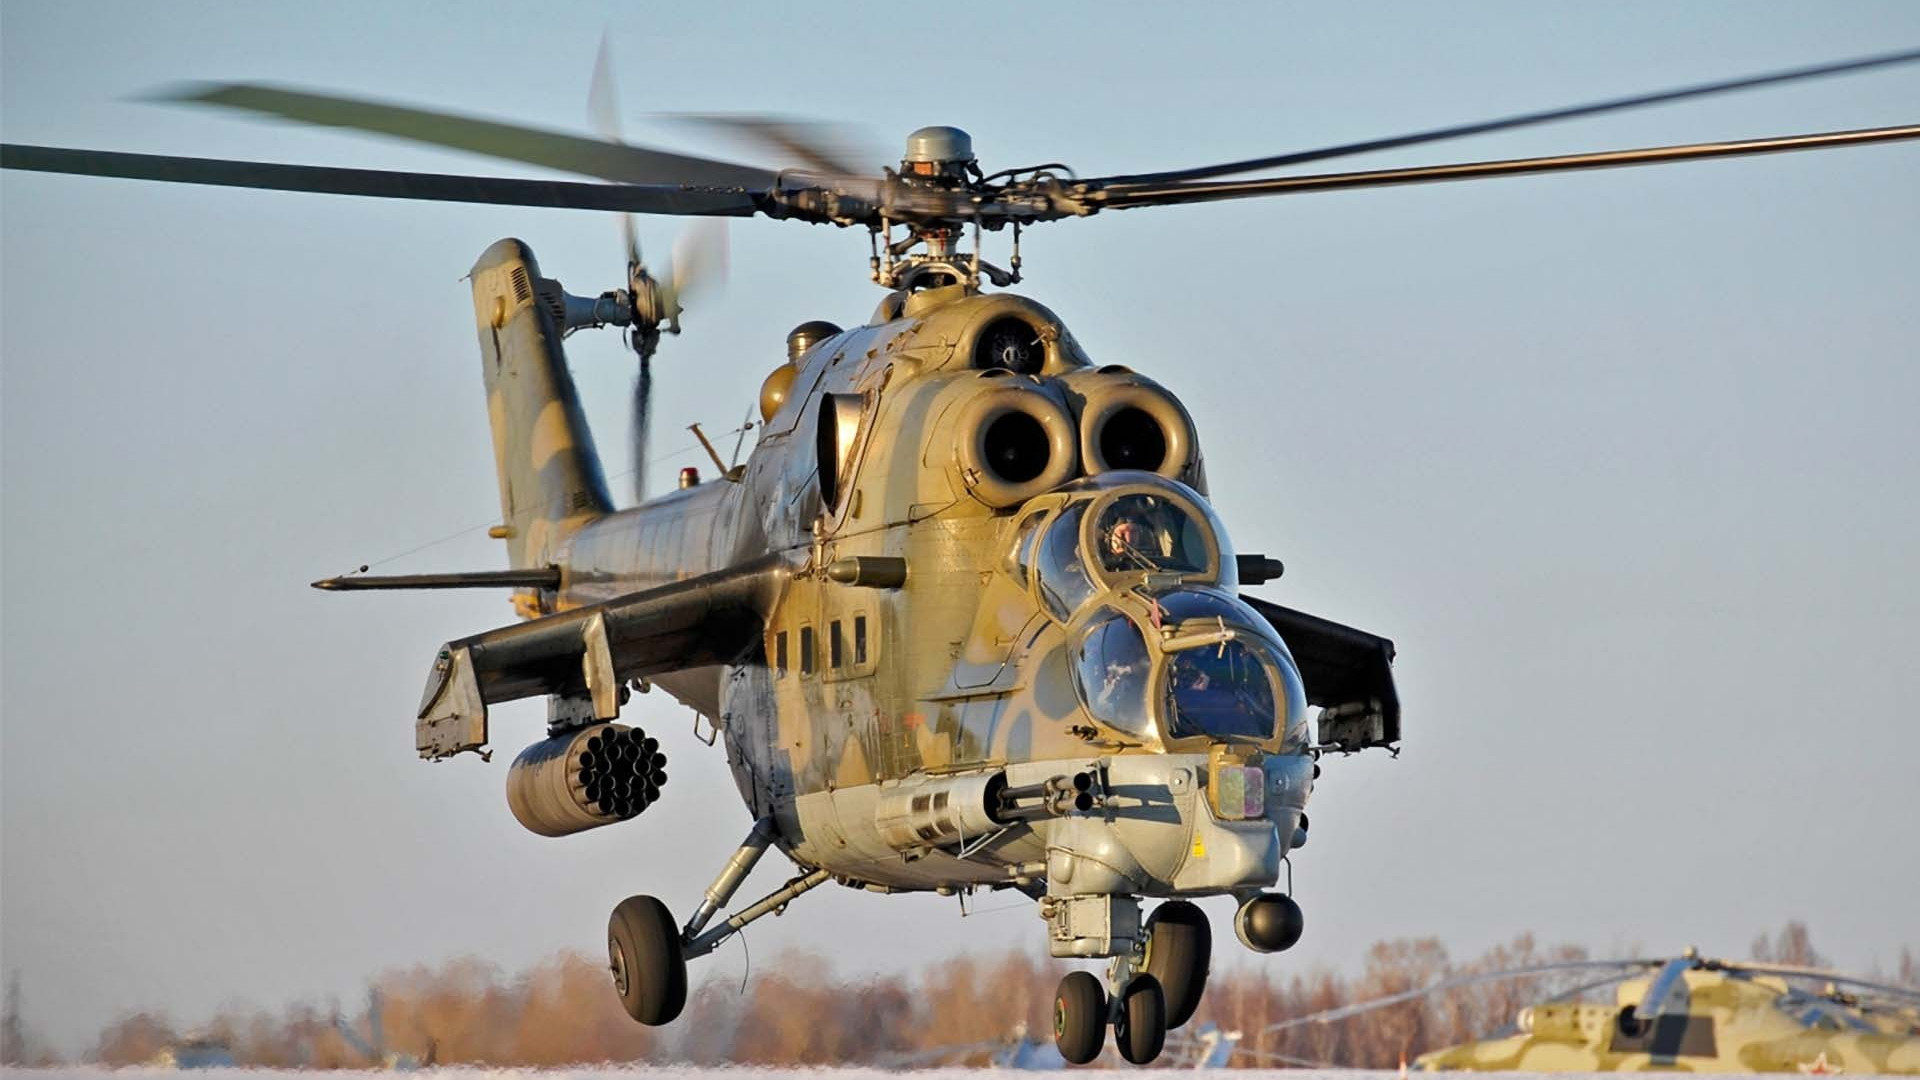 1920x1080  Wallpaper helicopter, mi-24, soviet, russia, transport, military,